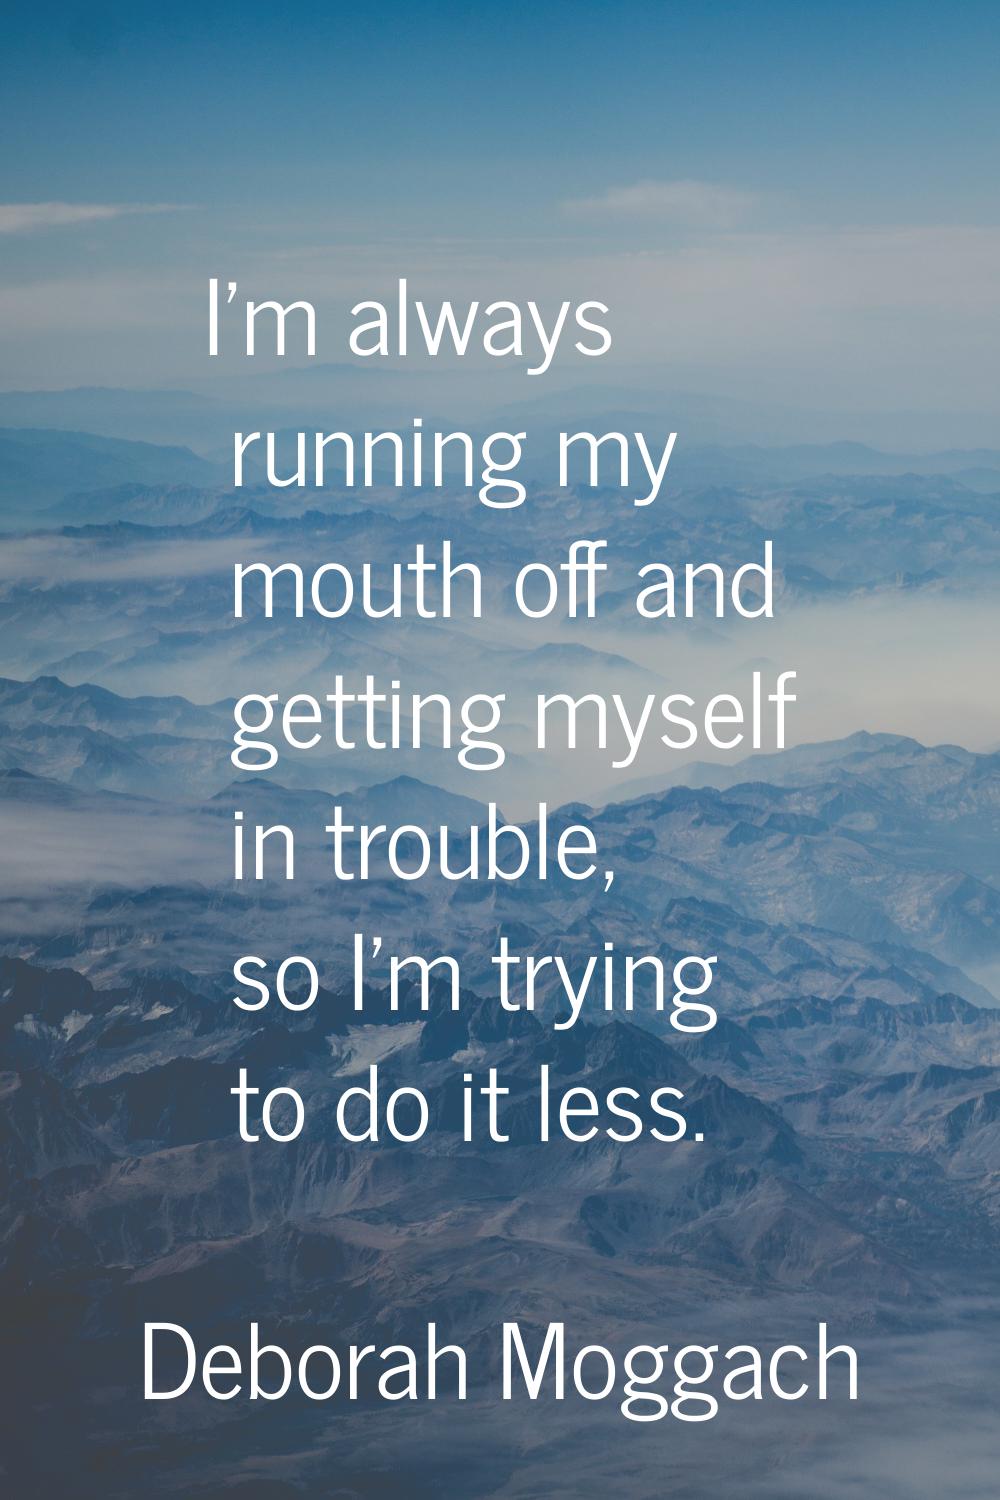 I'm always running my mouth off and getting myself in trouble, so I'm trying to do it less.